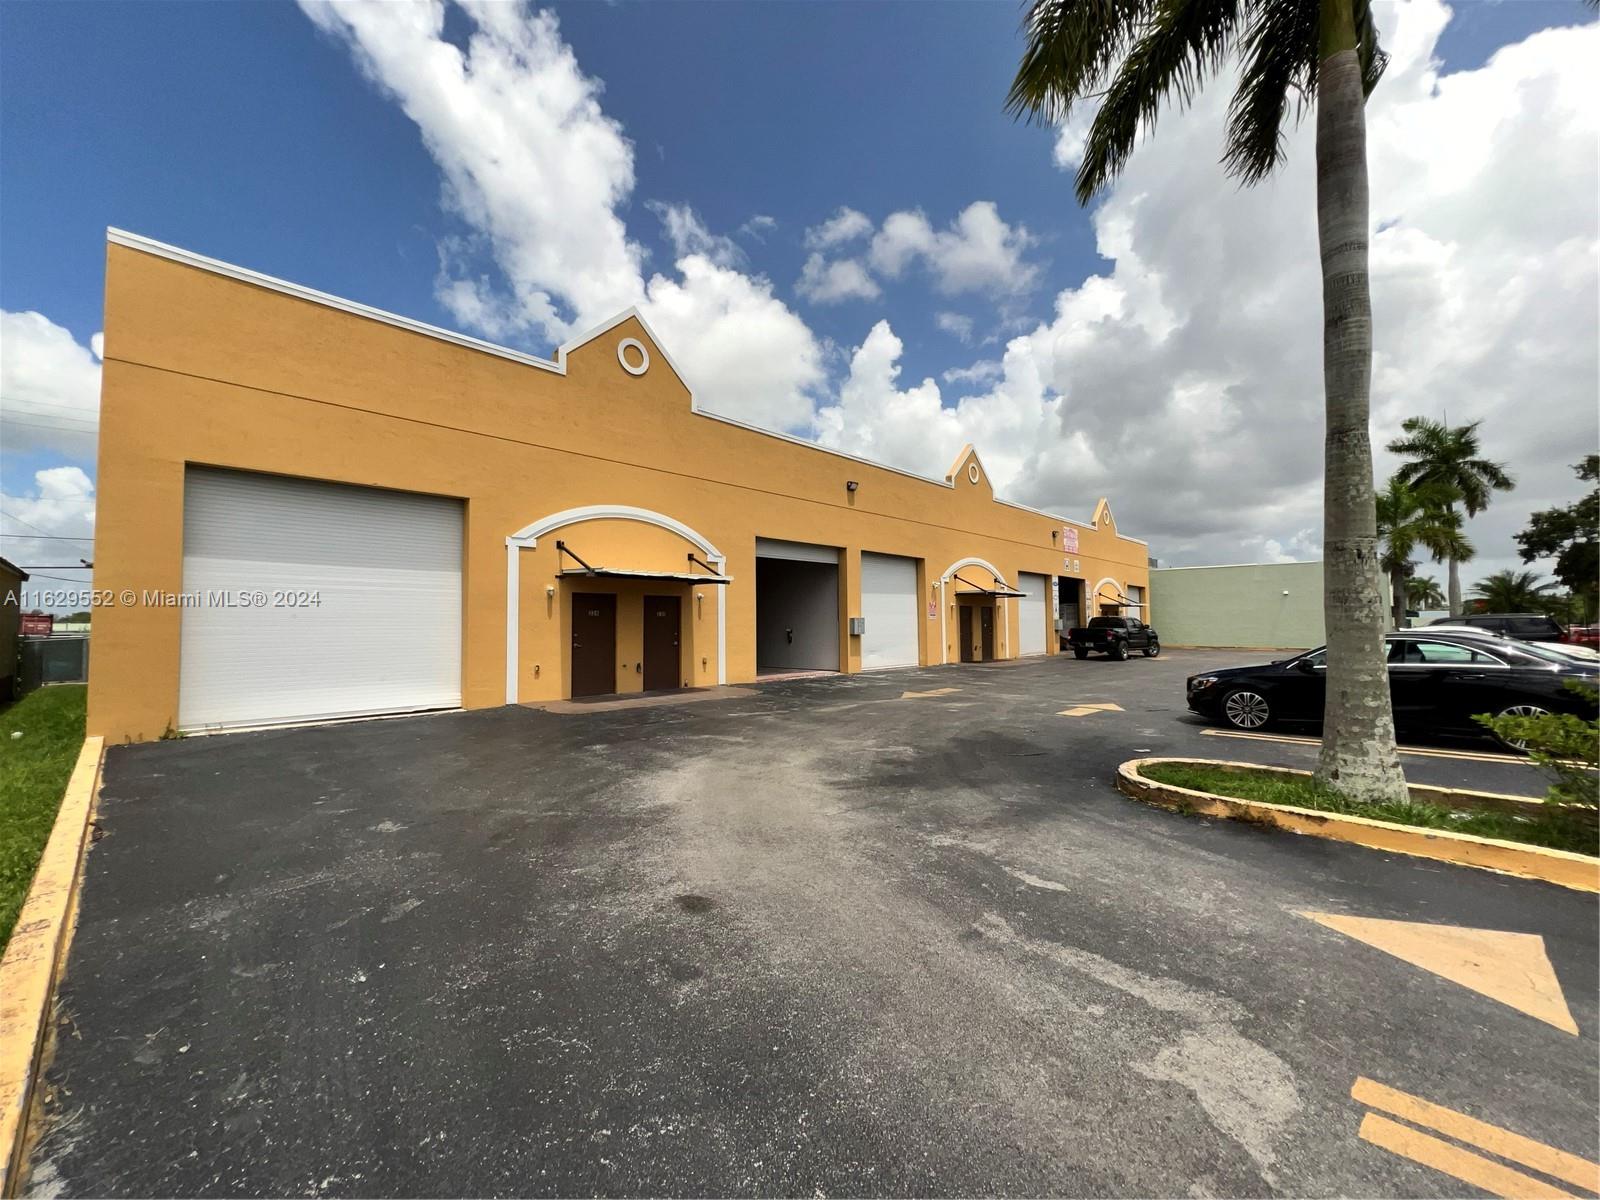 +1,400SF WAREHOUSE RARE OPPORTUNITY AVAILABLE FOR RENT AT THE INDUSTRIAL AREA OF HOMESTEAD, ZONED B3, OFFICE + WAREHOUSE, +20FT High ceilings, recently renovated, near Krome ave and S. Dixie hwy, it won't last long, call for a private appointment today!!!